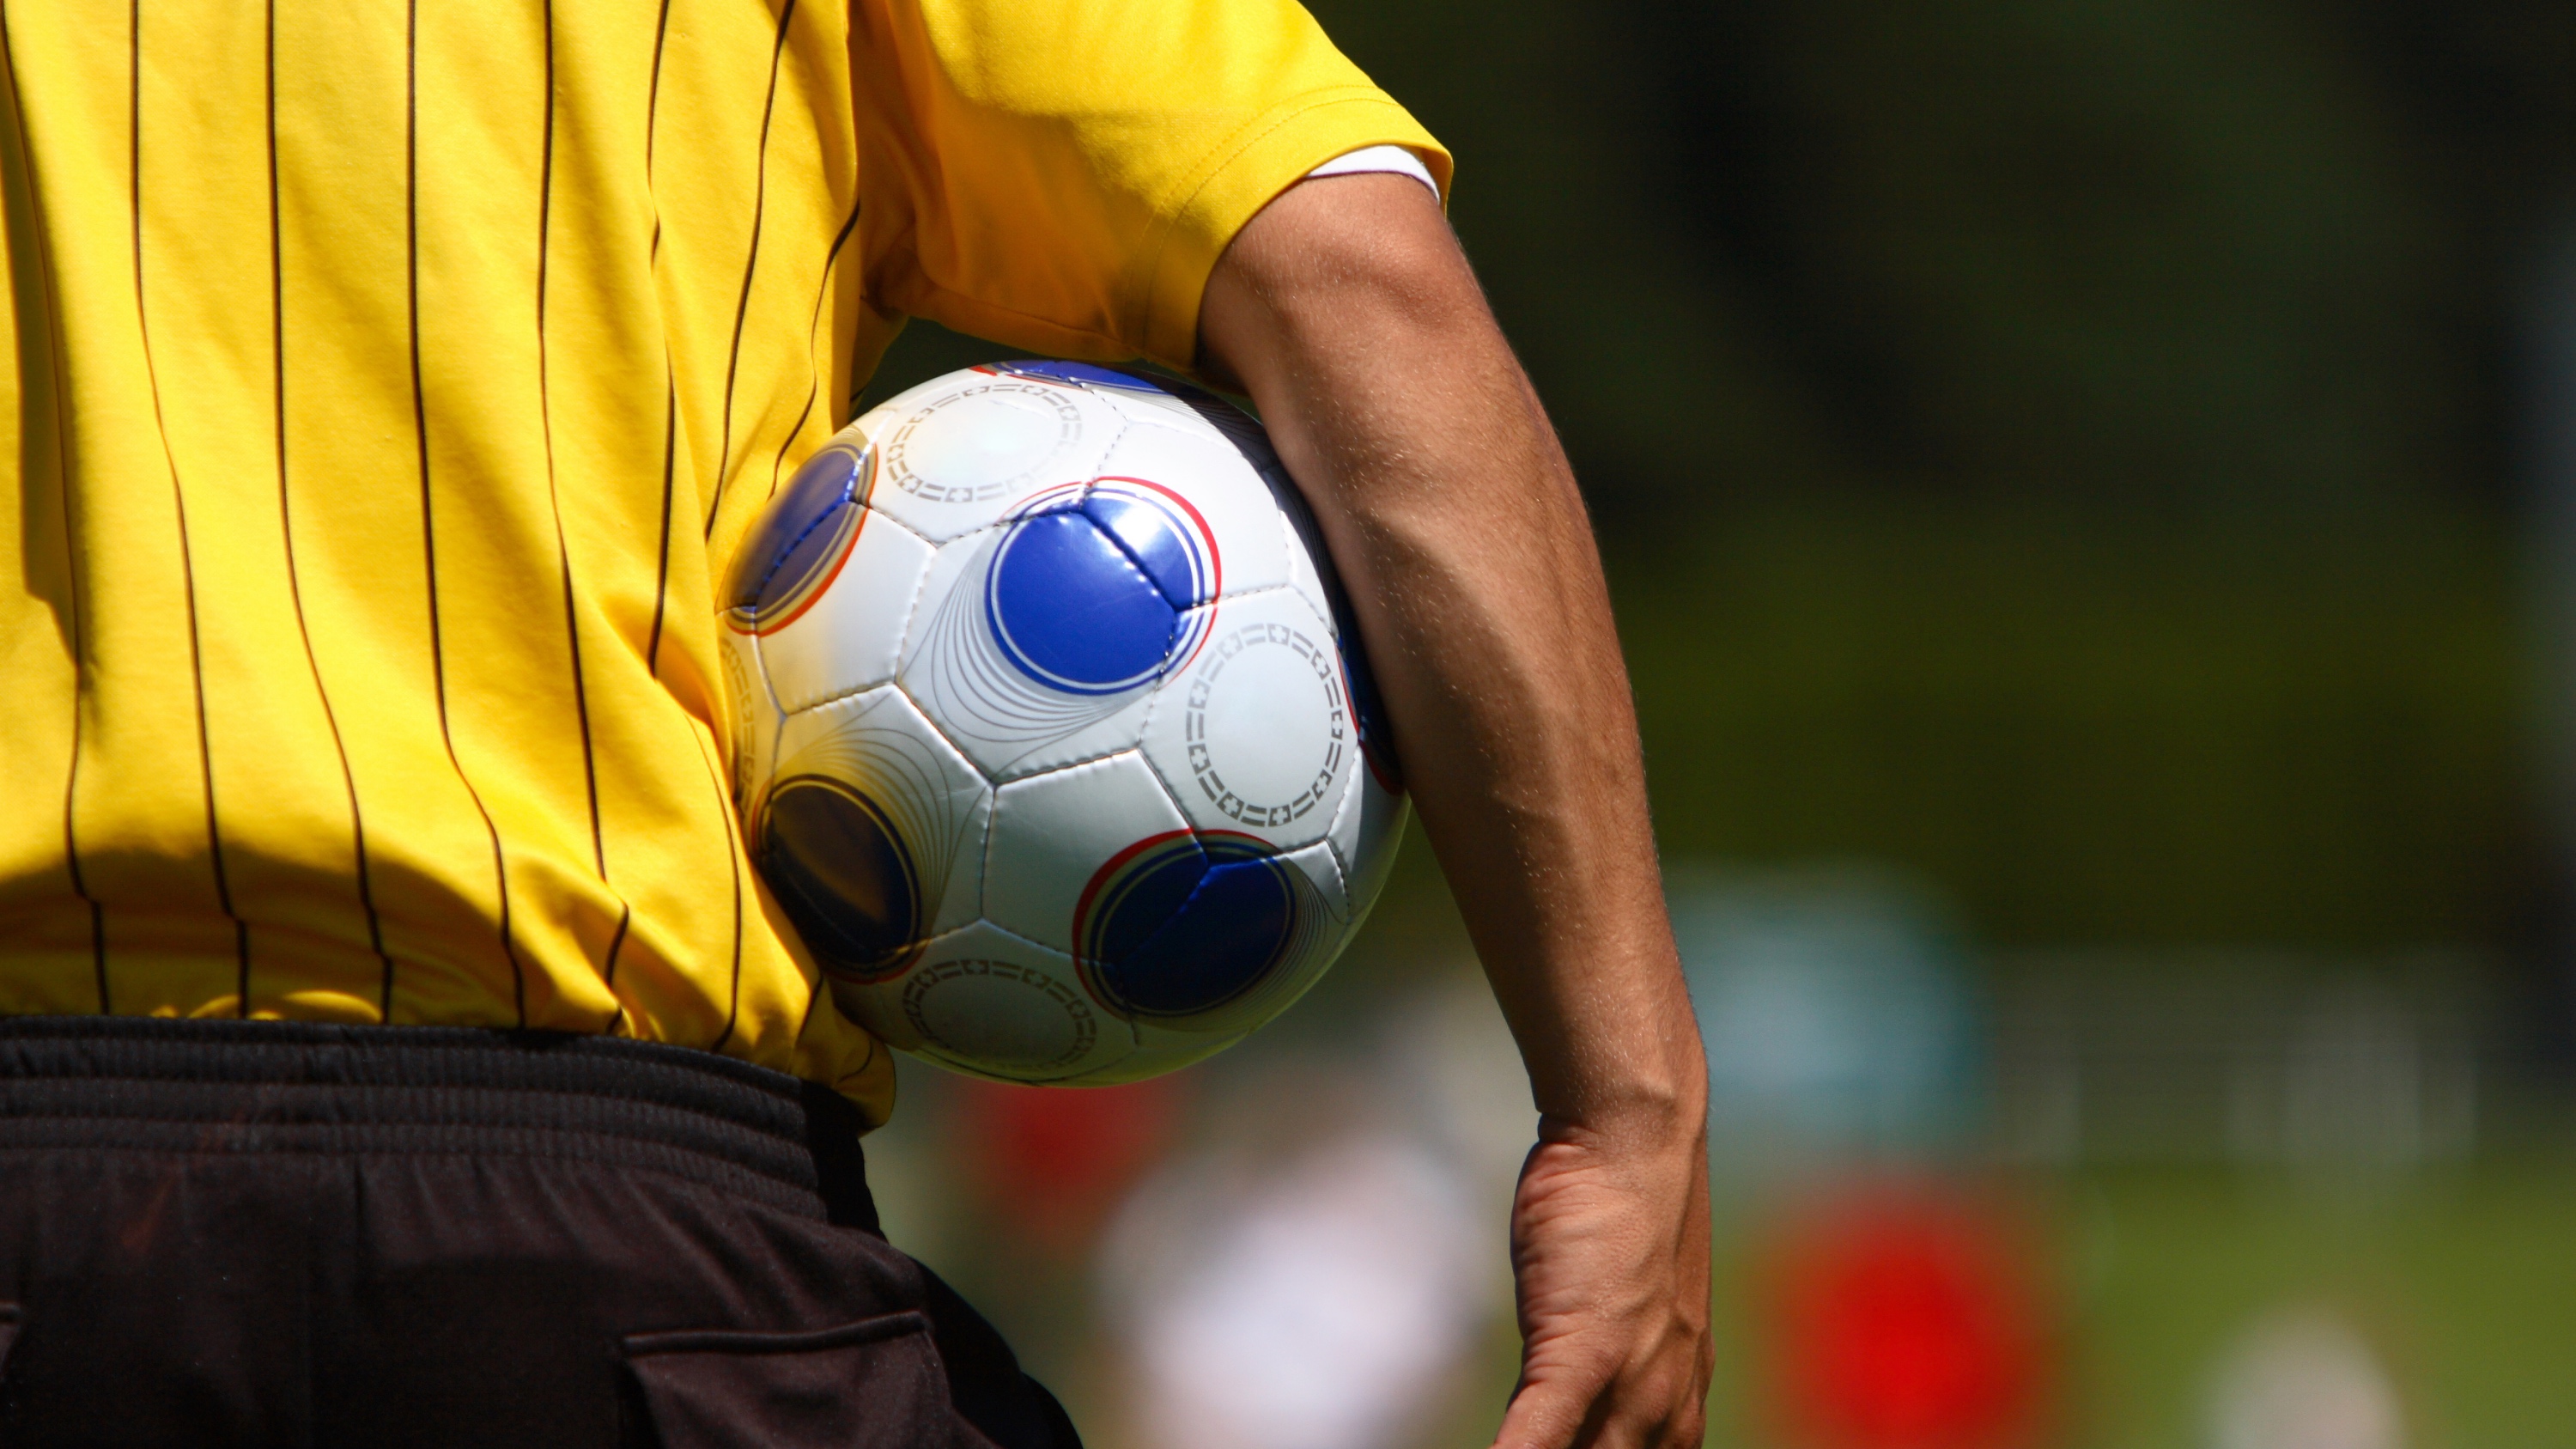 soccer referee holding a soccer ball